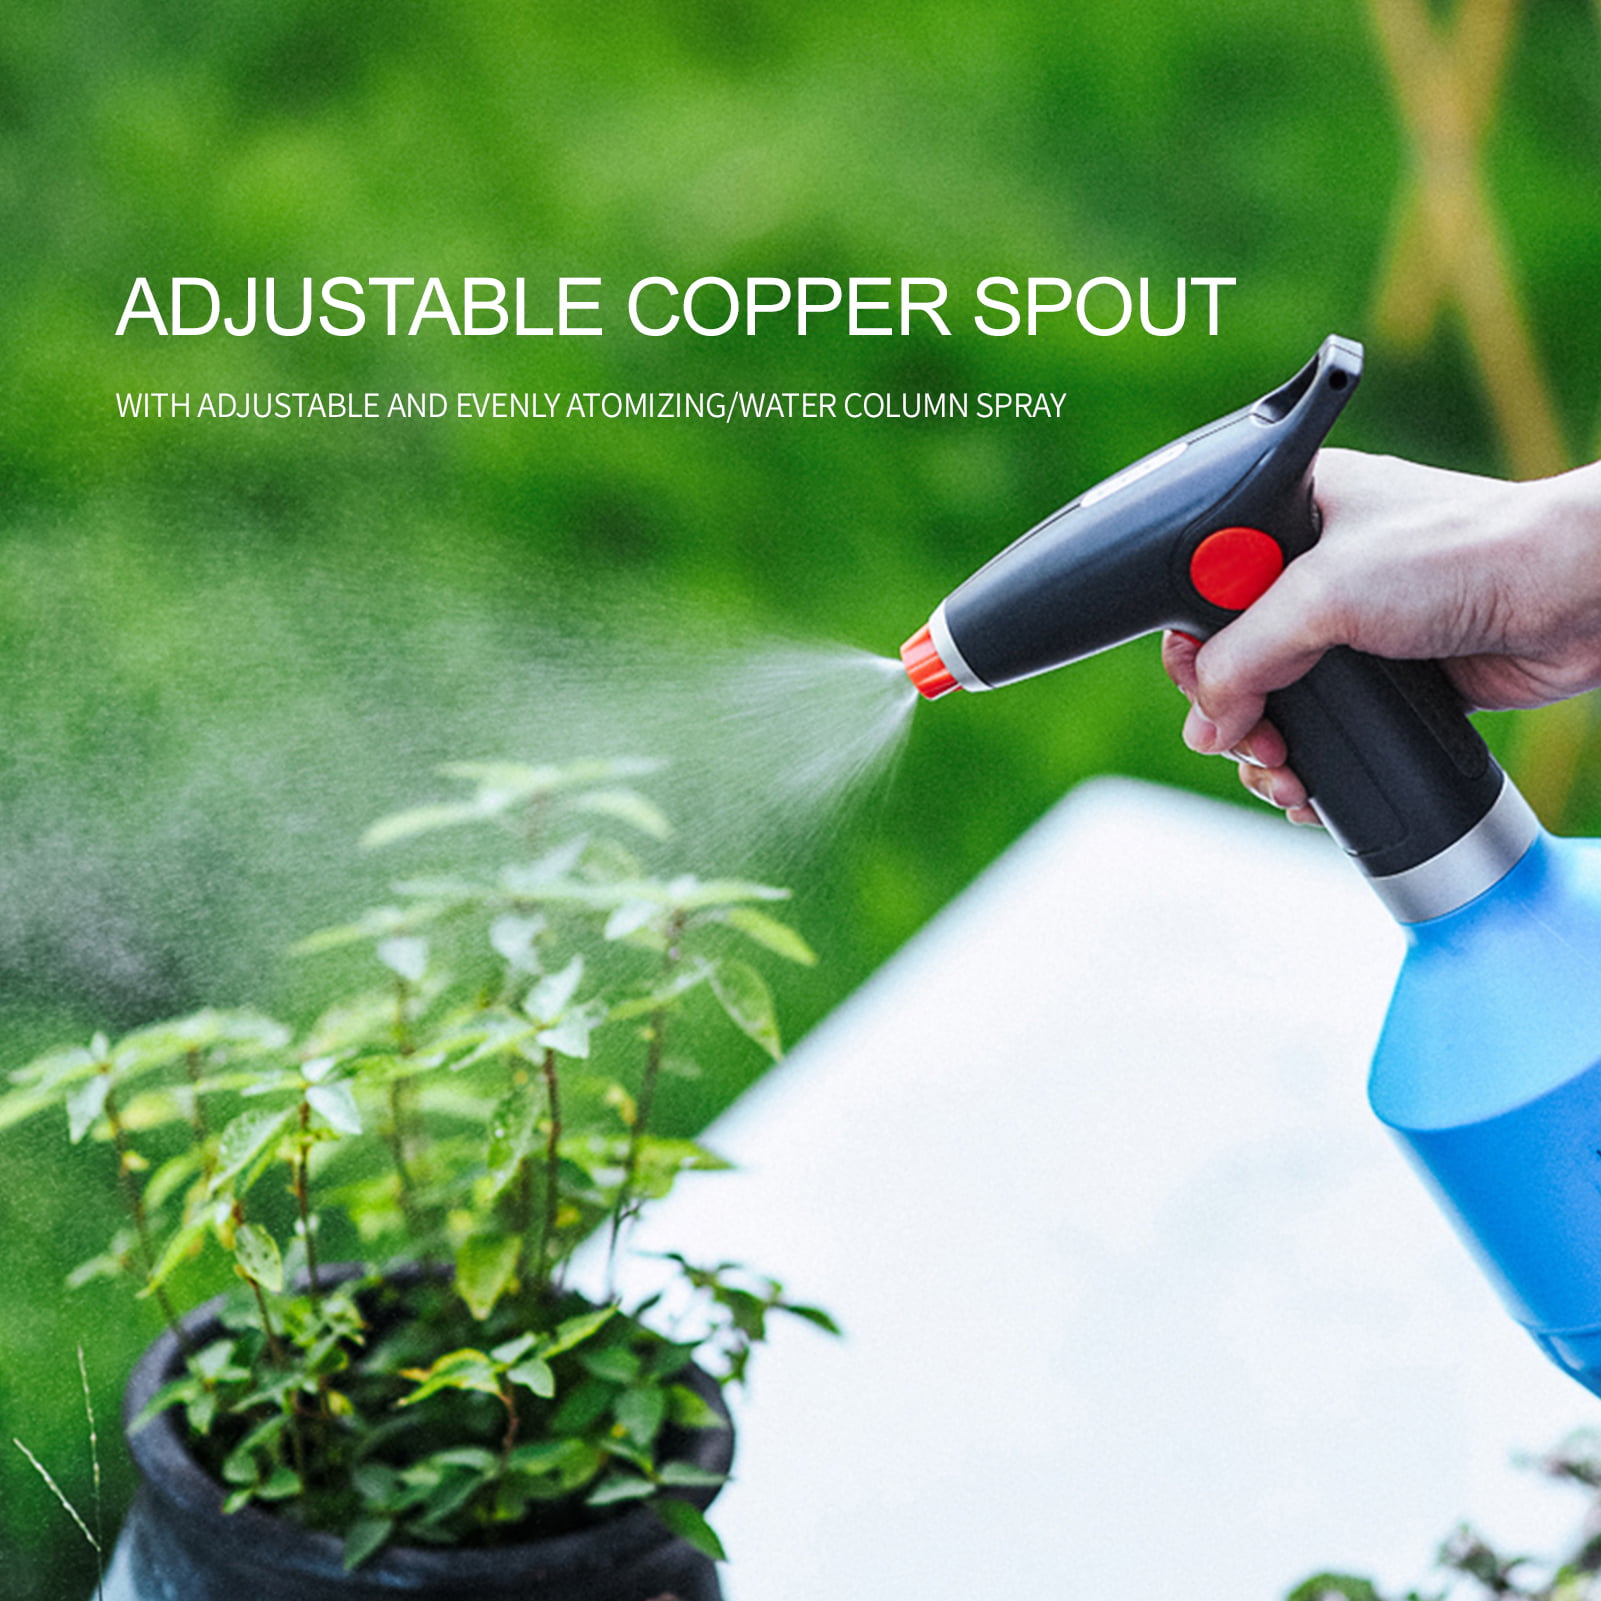 Automatic Plant Watering Devices Electric Watering Can with Adjustable Copper Spout Gardening for Hair T TOVIA 1L Electric Plant Mister Spray Bottle for Indoor/Outdoor Plants Fertilizing Cleaning Home 